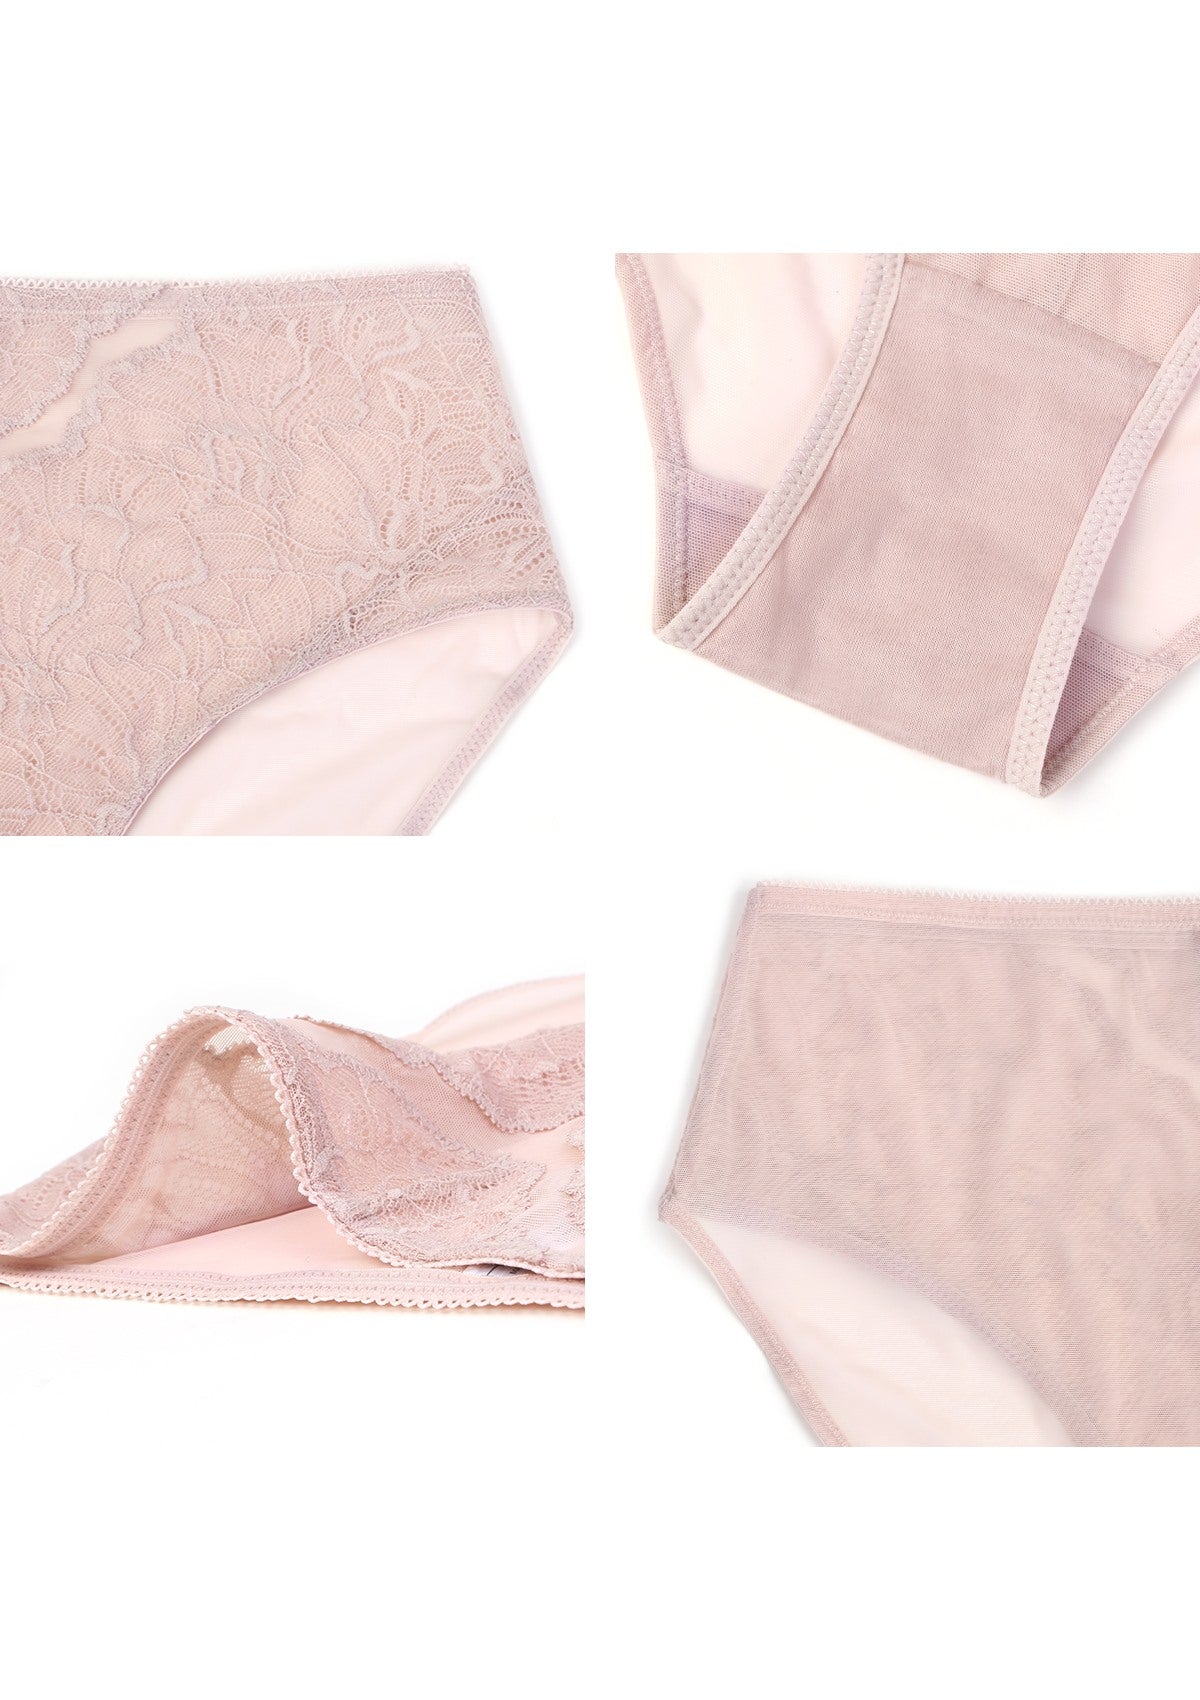 HSIA Blossom High-Rise Floral Lacy Panty-Comfort In Style - XL / Dusty Peach